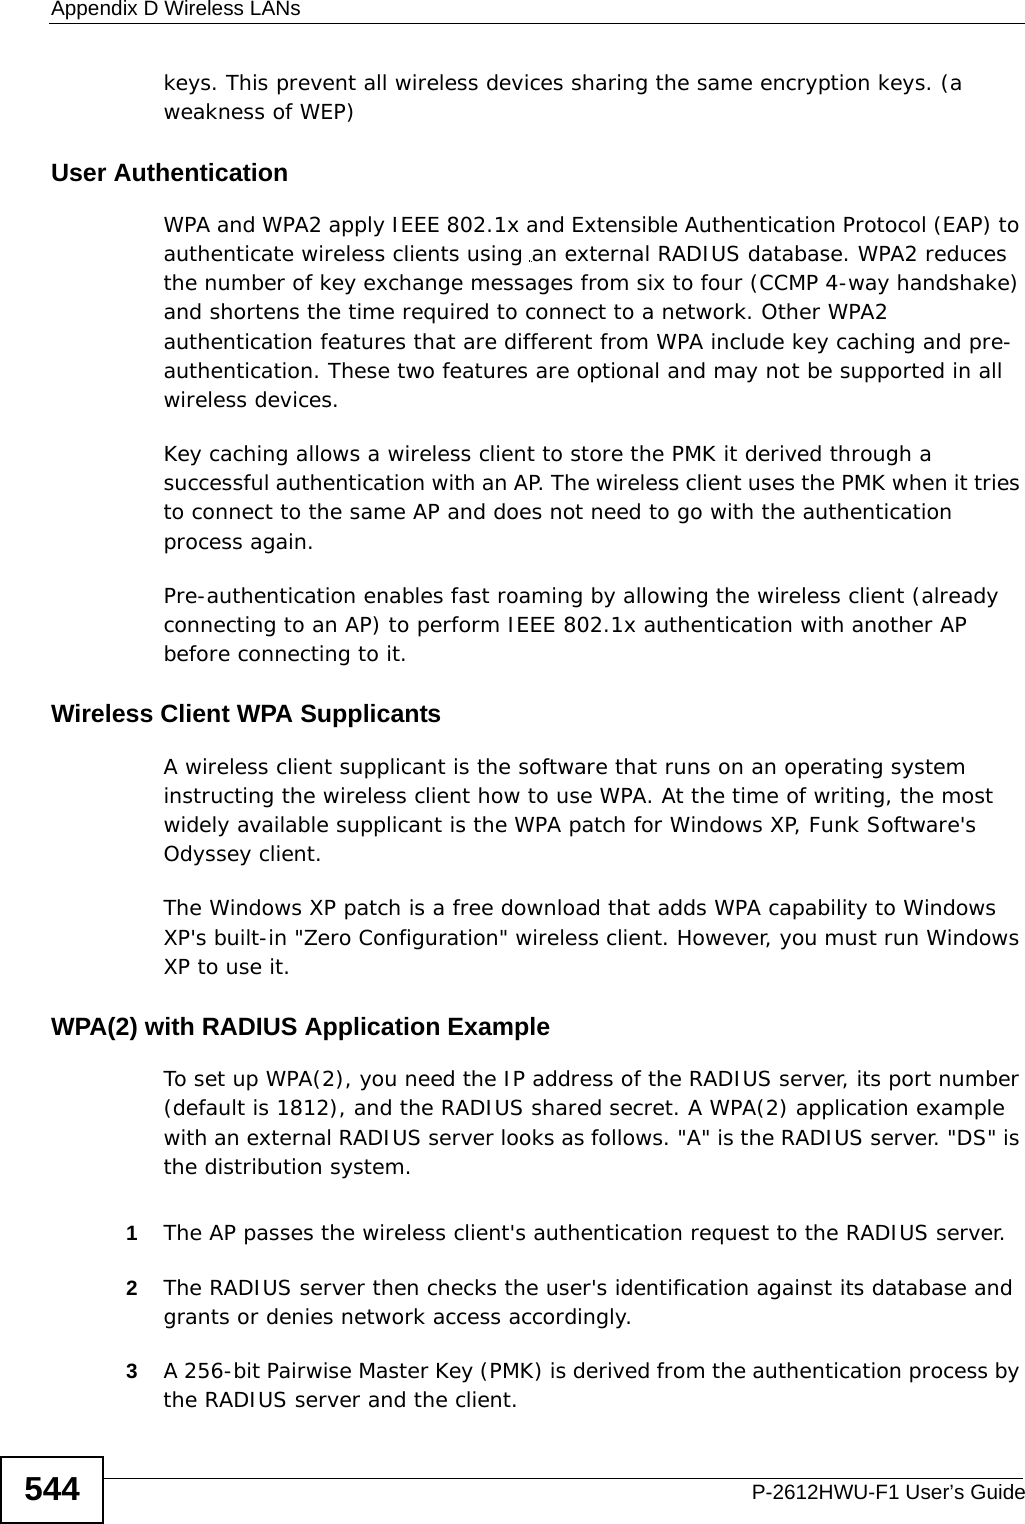 Appendix D Wireless LANsP-2612HWU-F1 User’s Guide544keys. This prevent all wireless devices sharing the same encryption keys. (a weakness of WEP)User Authentication WPA and WPA2 apply IEEE 802.1x and Extensible Authentication Protocol (EAP) to authenticate wireless clients using an external RADIUS database. WPA2 reduces the number of key exchange messages from six to four (CCMP 4-way handshake) and shortens the time required to connect to a network. Other WPA2 authentication features that are different from WPA include key caching and pre-authentication. These two features are optional and may not be supported in all wireless devices.Key caching allows a wireless client to store the PMK it derived through a successful authentication with an AP. The wireless client uses the PMK when it tries to connect to the same AP and does not need to go with the authentication process again.Pre-authentication enables fast roaming by allowing the wireless client (already connecting to an AP) to perform IEEE 802.1x authentication with another AP before connecting to it.Wireless Client WPA SupplicantsA wireless client supplicant is the software that runs on an operating system instructing the wireless client how to use WPA. At the time of writing, the most widely available supplicant is the WPA patch for Windows XP, Funk Software&apos;s Odyssey client. The Windows XP patch is a free download that adds WPA capability to Windows XP&apos;s built-in &quot;Zero Configuration&quot; wireless client. However, you must run Windows XP to use it. WPA(2) with RADIUS Application ExampleTo set up WPA(2), you need the IP address of the RADIUS server, its port number (default is 1812), and the RADIUS shared secret. A WPA(2) application example with an external RADIUS server looks as follows. &quot;A&quot; is the RADIUS server. &quot;DS&quot; is the distribution system.1The AP passes the wireless client&apos;s authentication request to the RADIUS server.2The RADIUS server then checks the user&apos;s identification against its database and grants or denies network access accordingly.3A 256-bit Pairwise Master Key (PMK) is derived from the authentication process by the RADIUS server and the client.